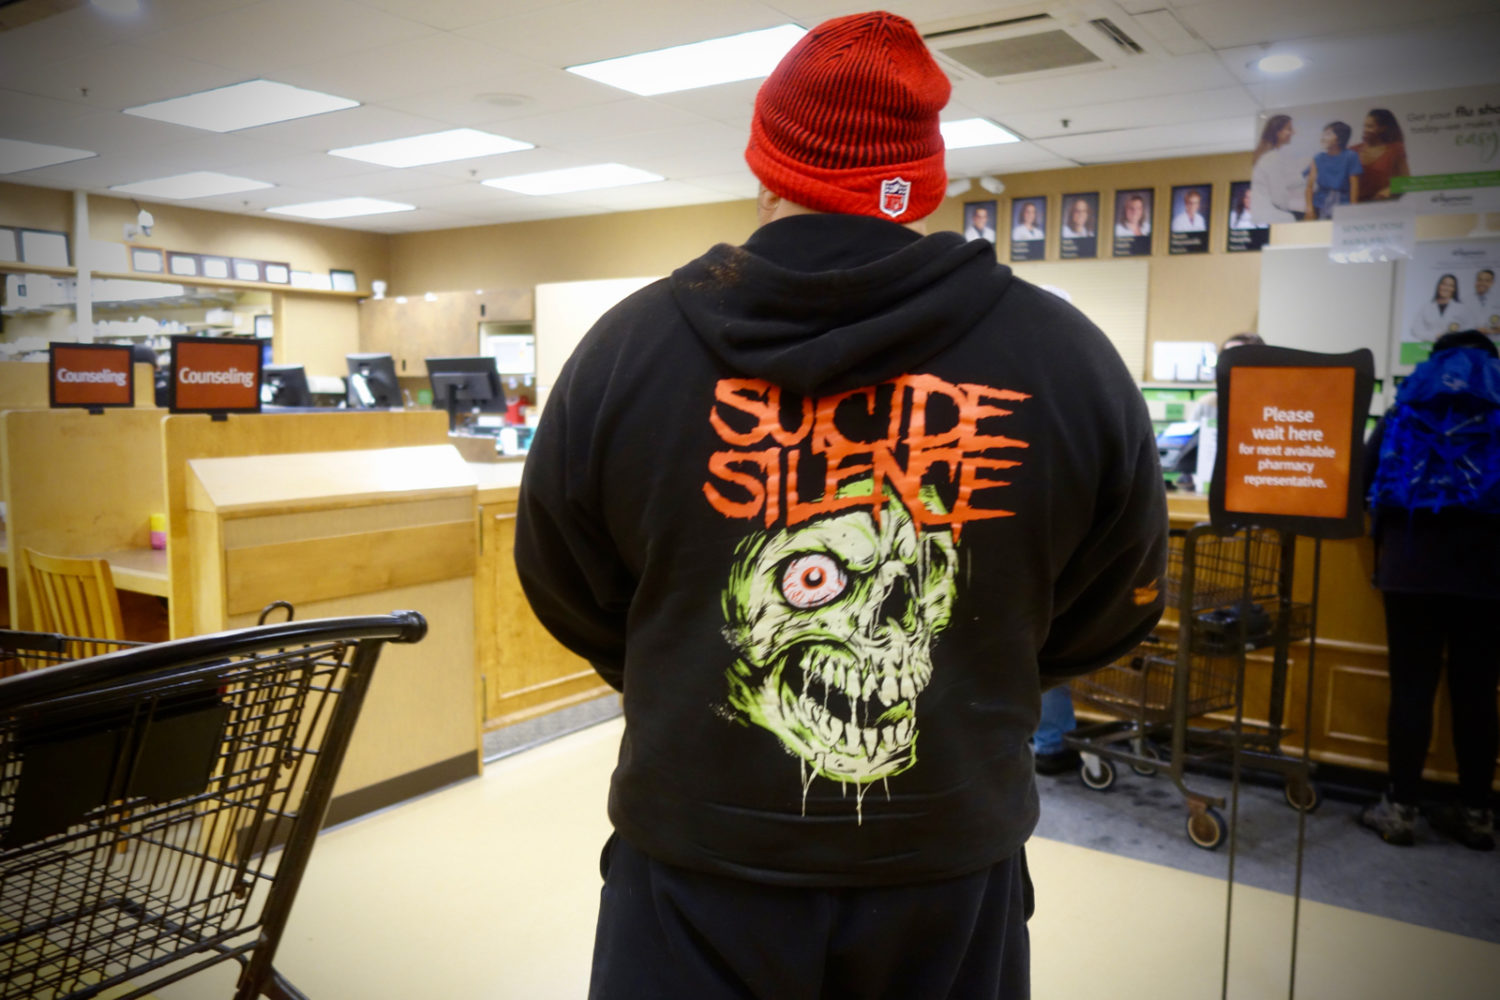 Guy with Suicide Shirt in line at Wegman's Pharmacy